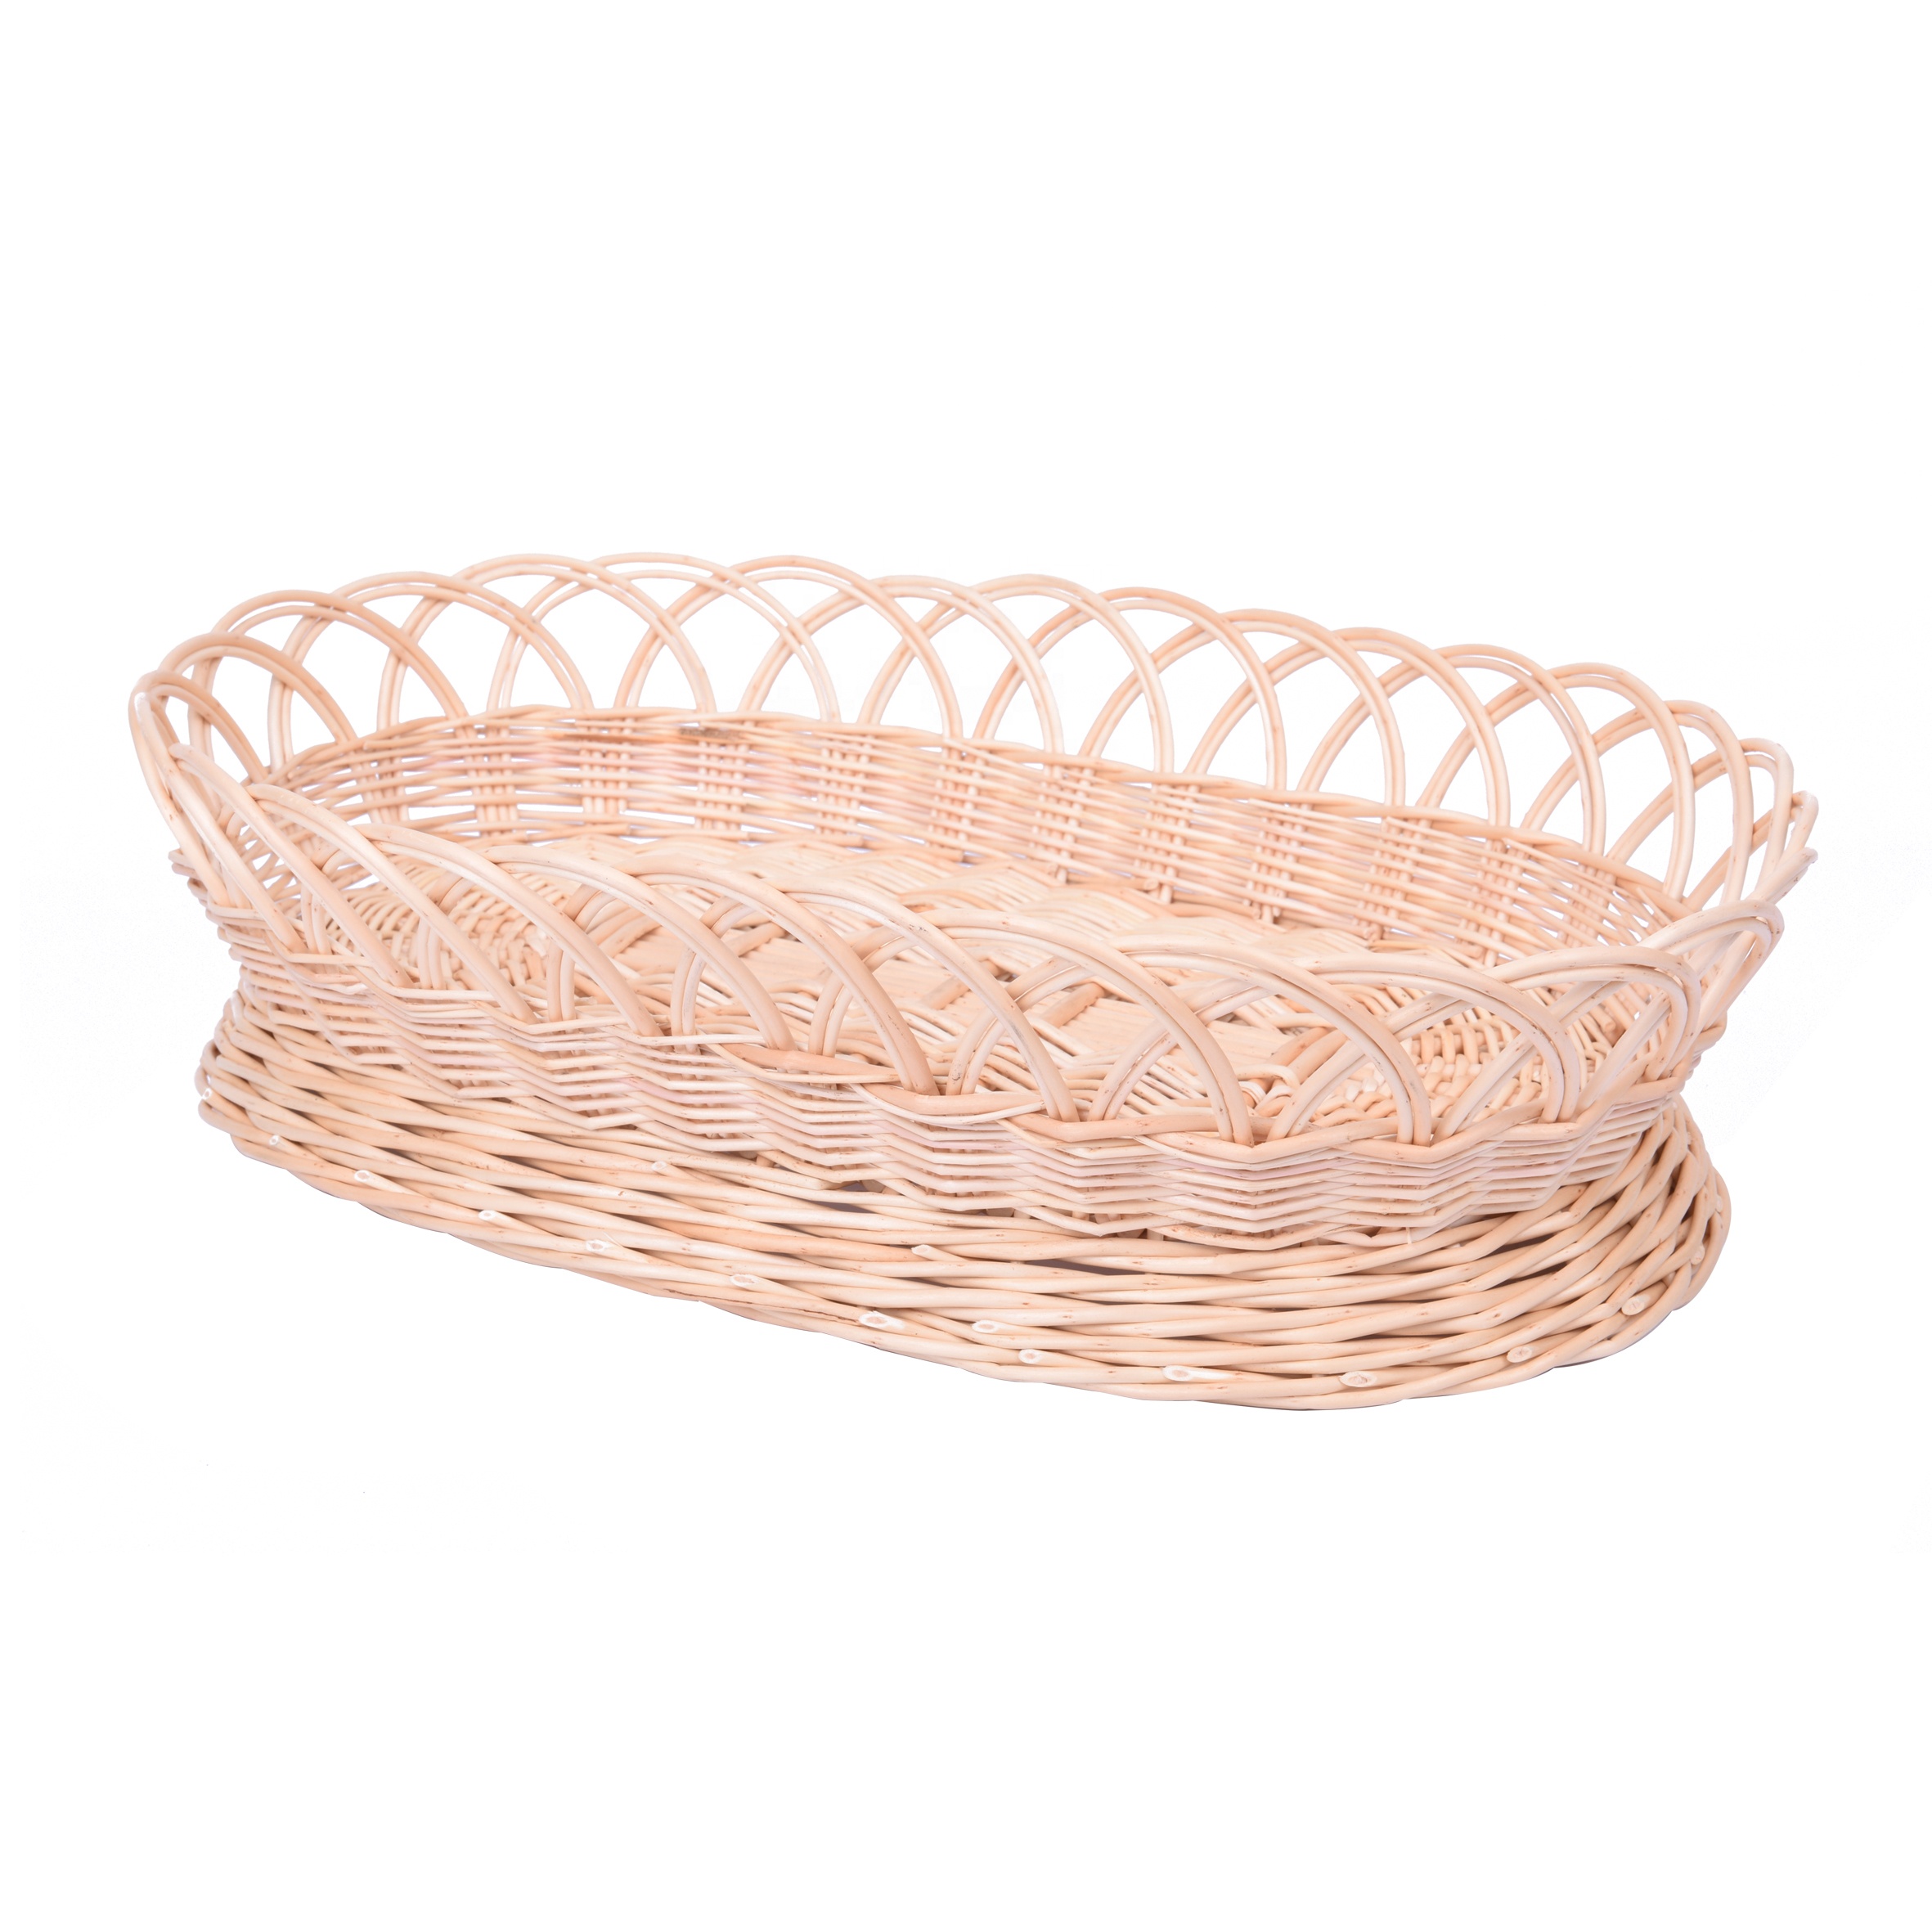 Bamboo Basket Ellipse Storage Shelf Decorative Trays Natural Color Support Simply Everyday Travel,party